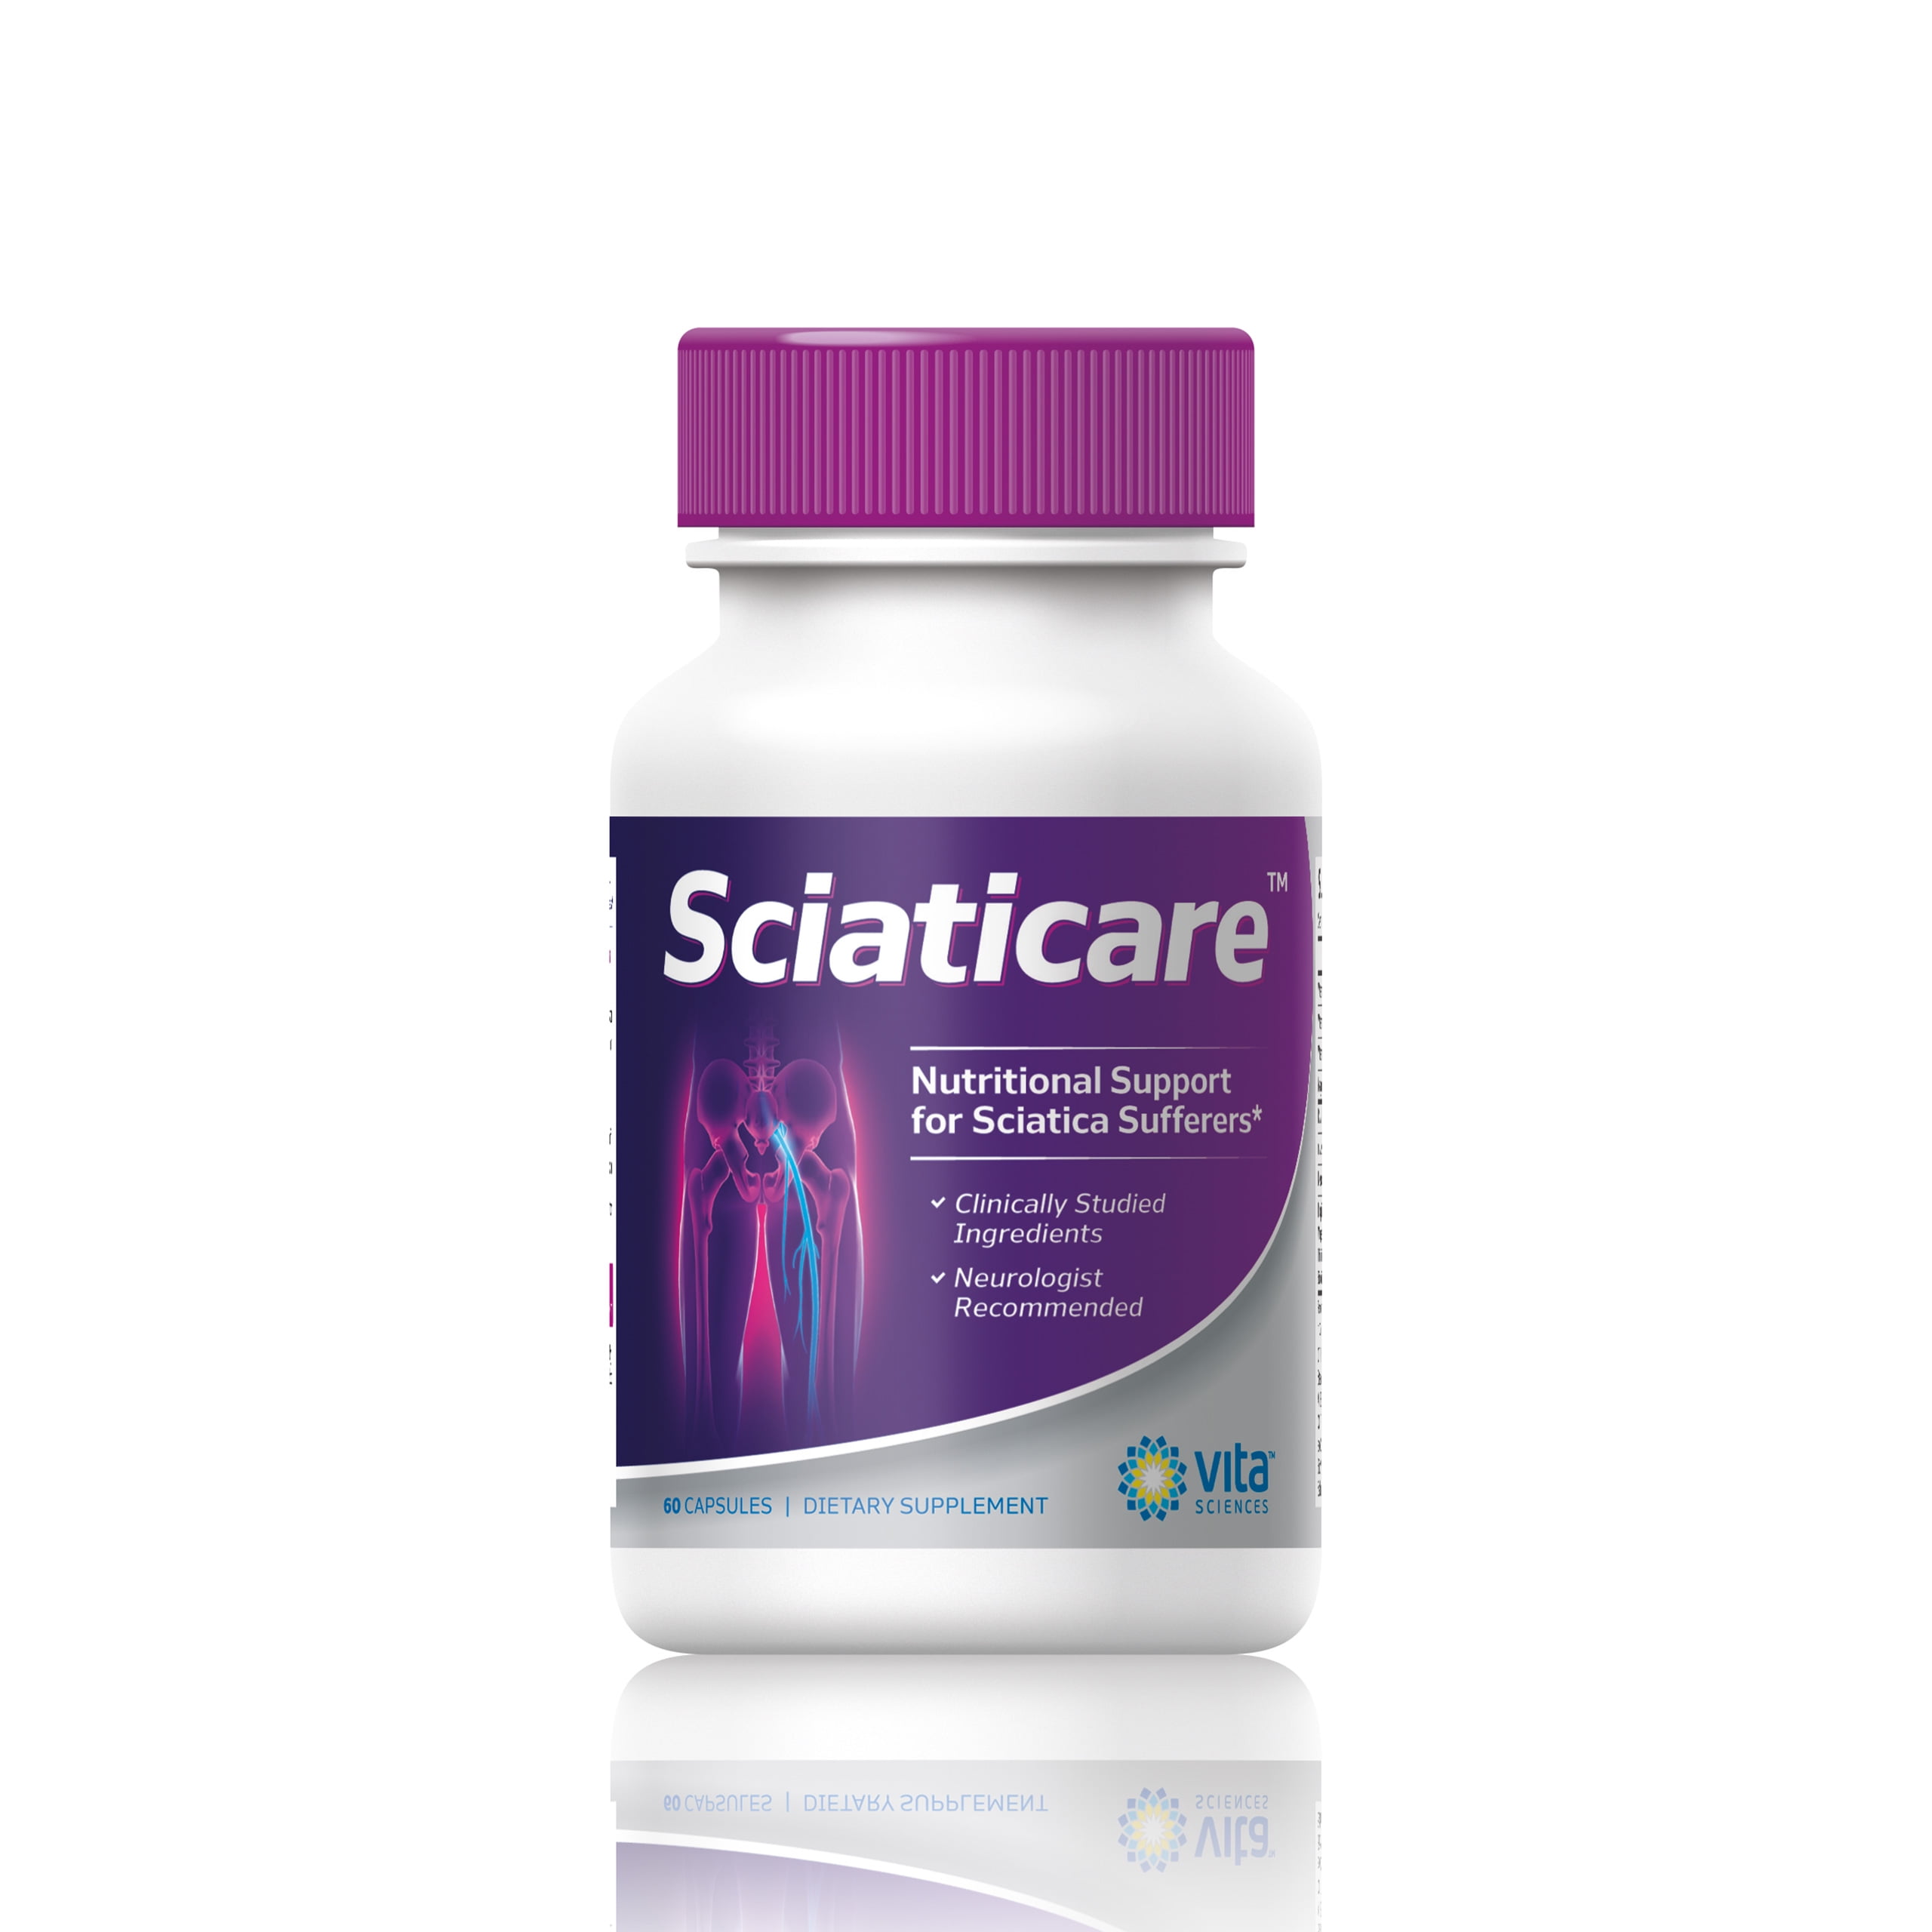 Relief from sciatic nerve pain